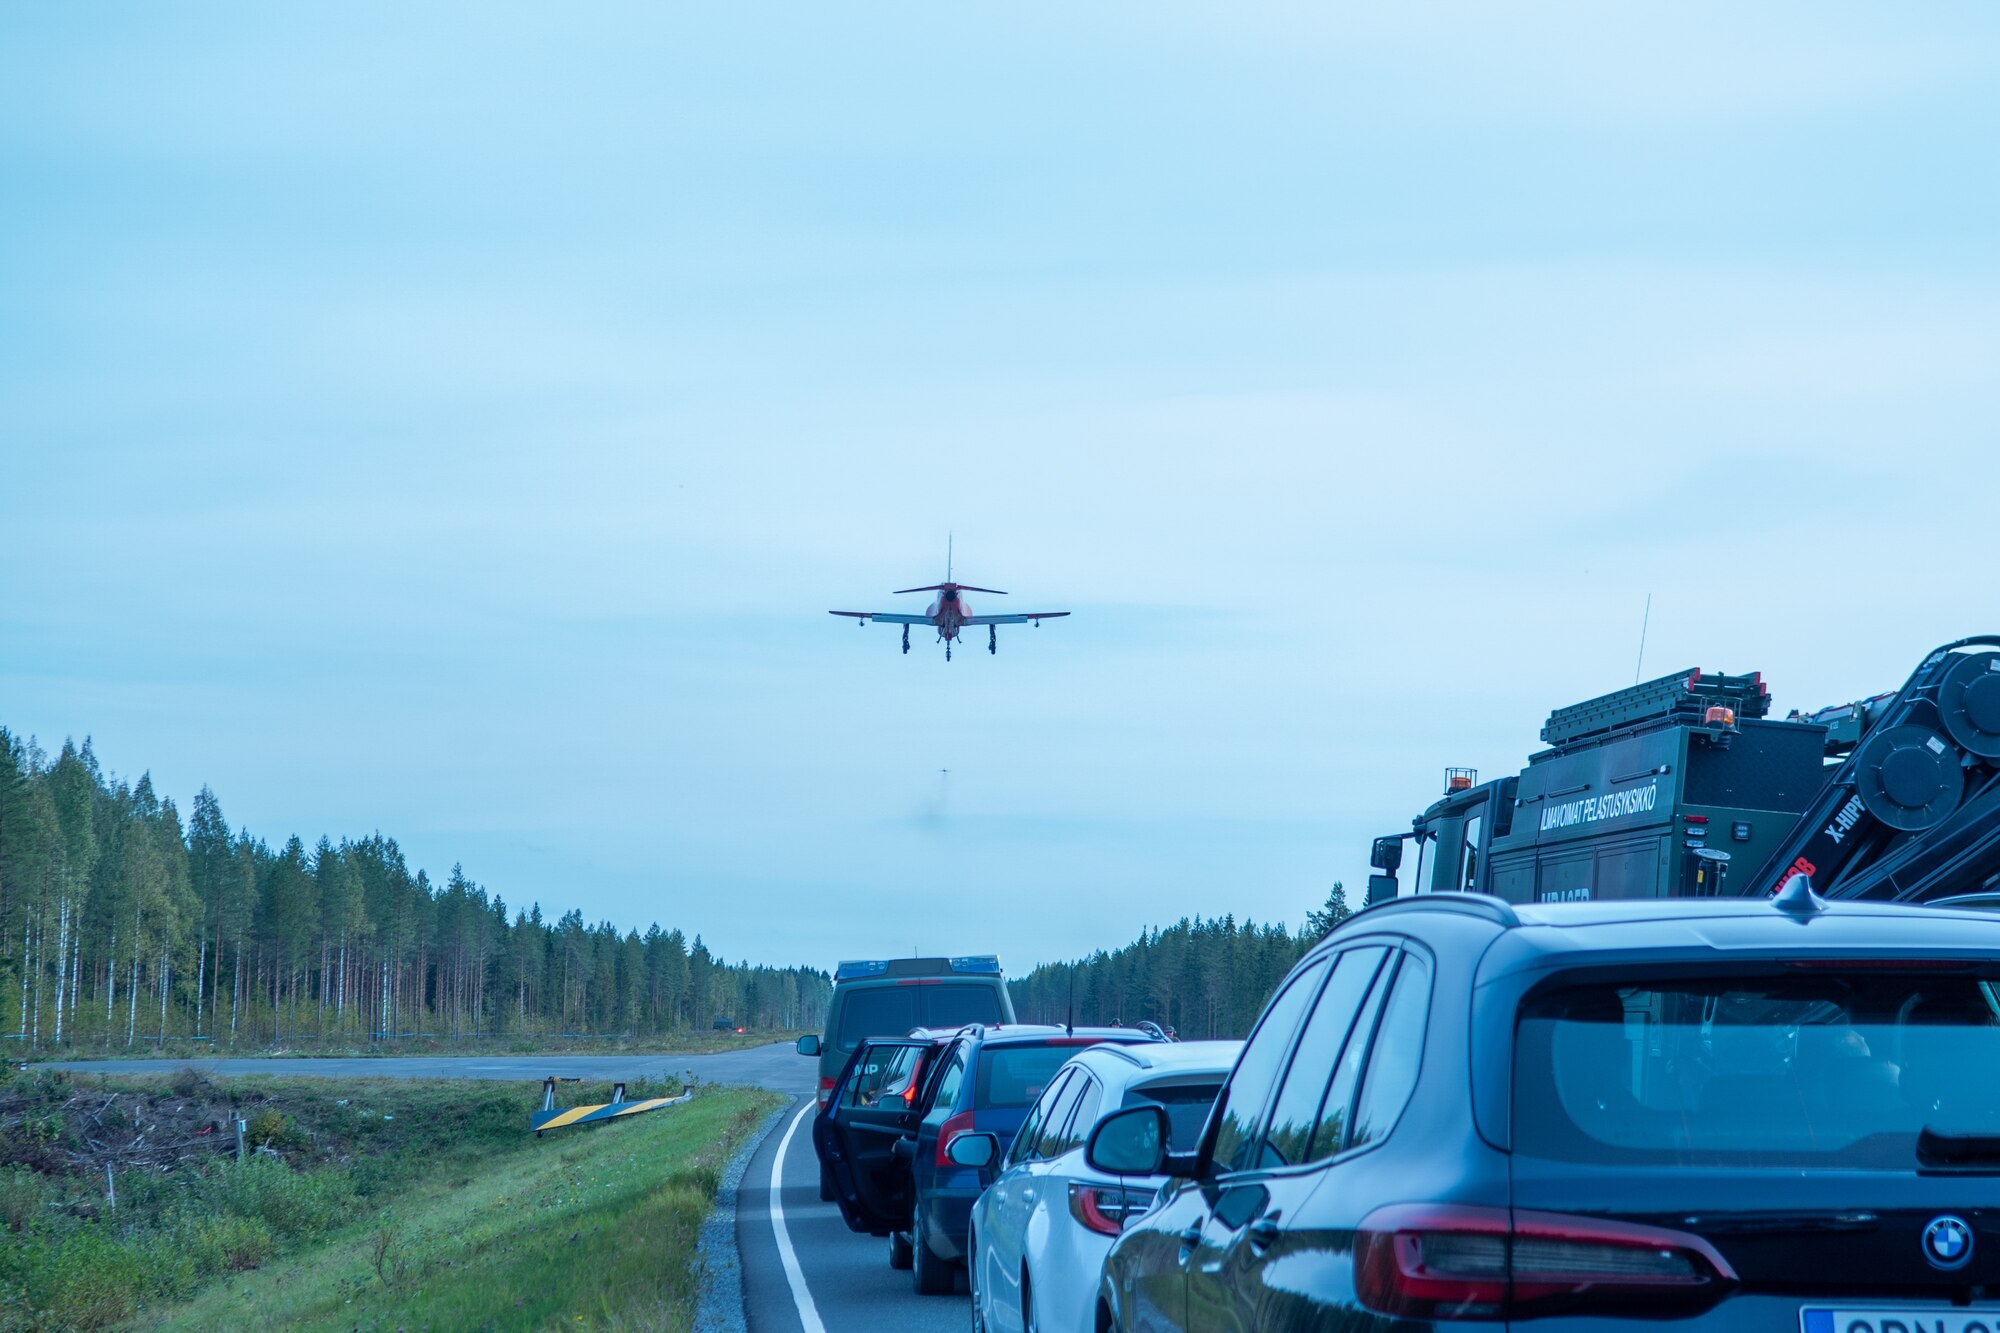 A photo of an airplane flying over a row of cars parked on a highway.